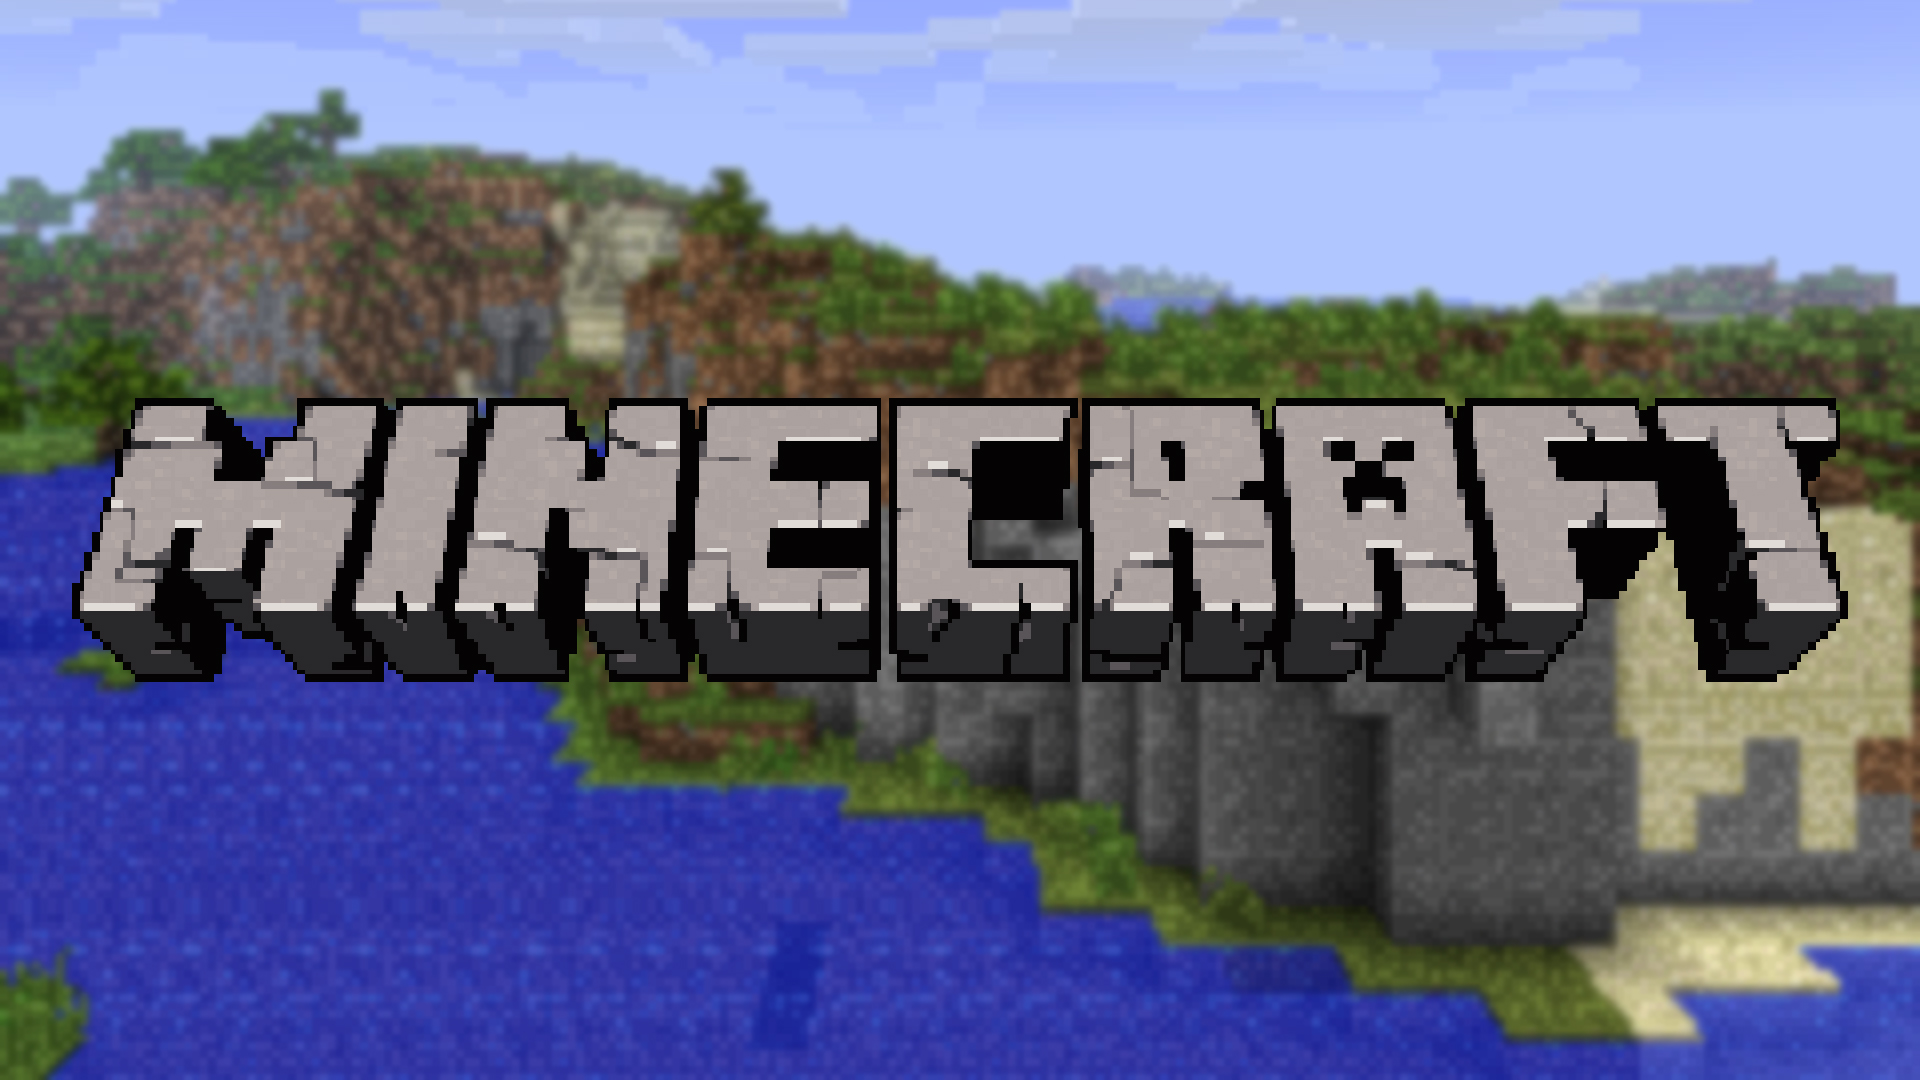 Minecraft’s Java Edition In 2021 Will Require A Microsoft Account To Play Enjoy This Game!